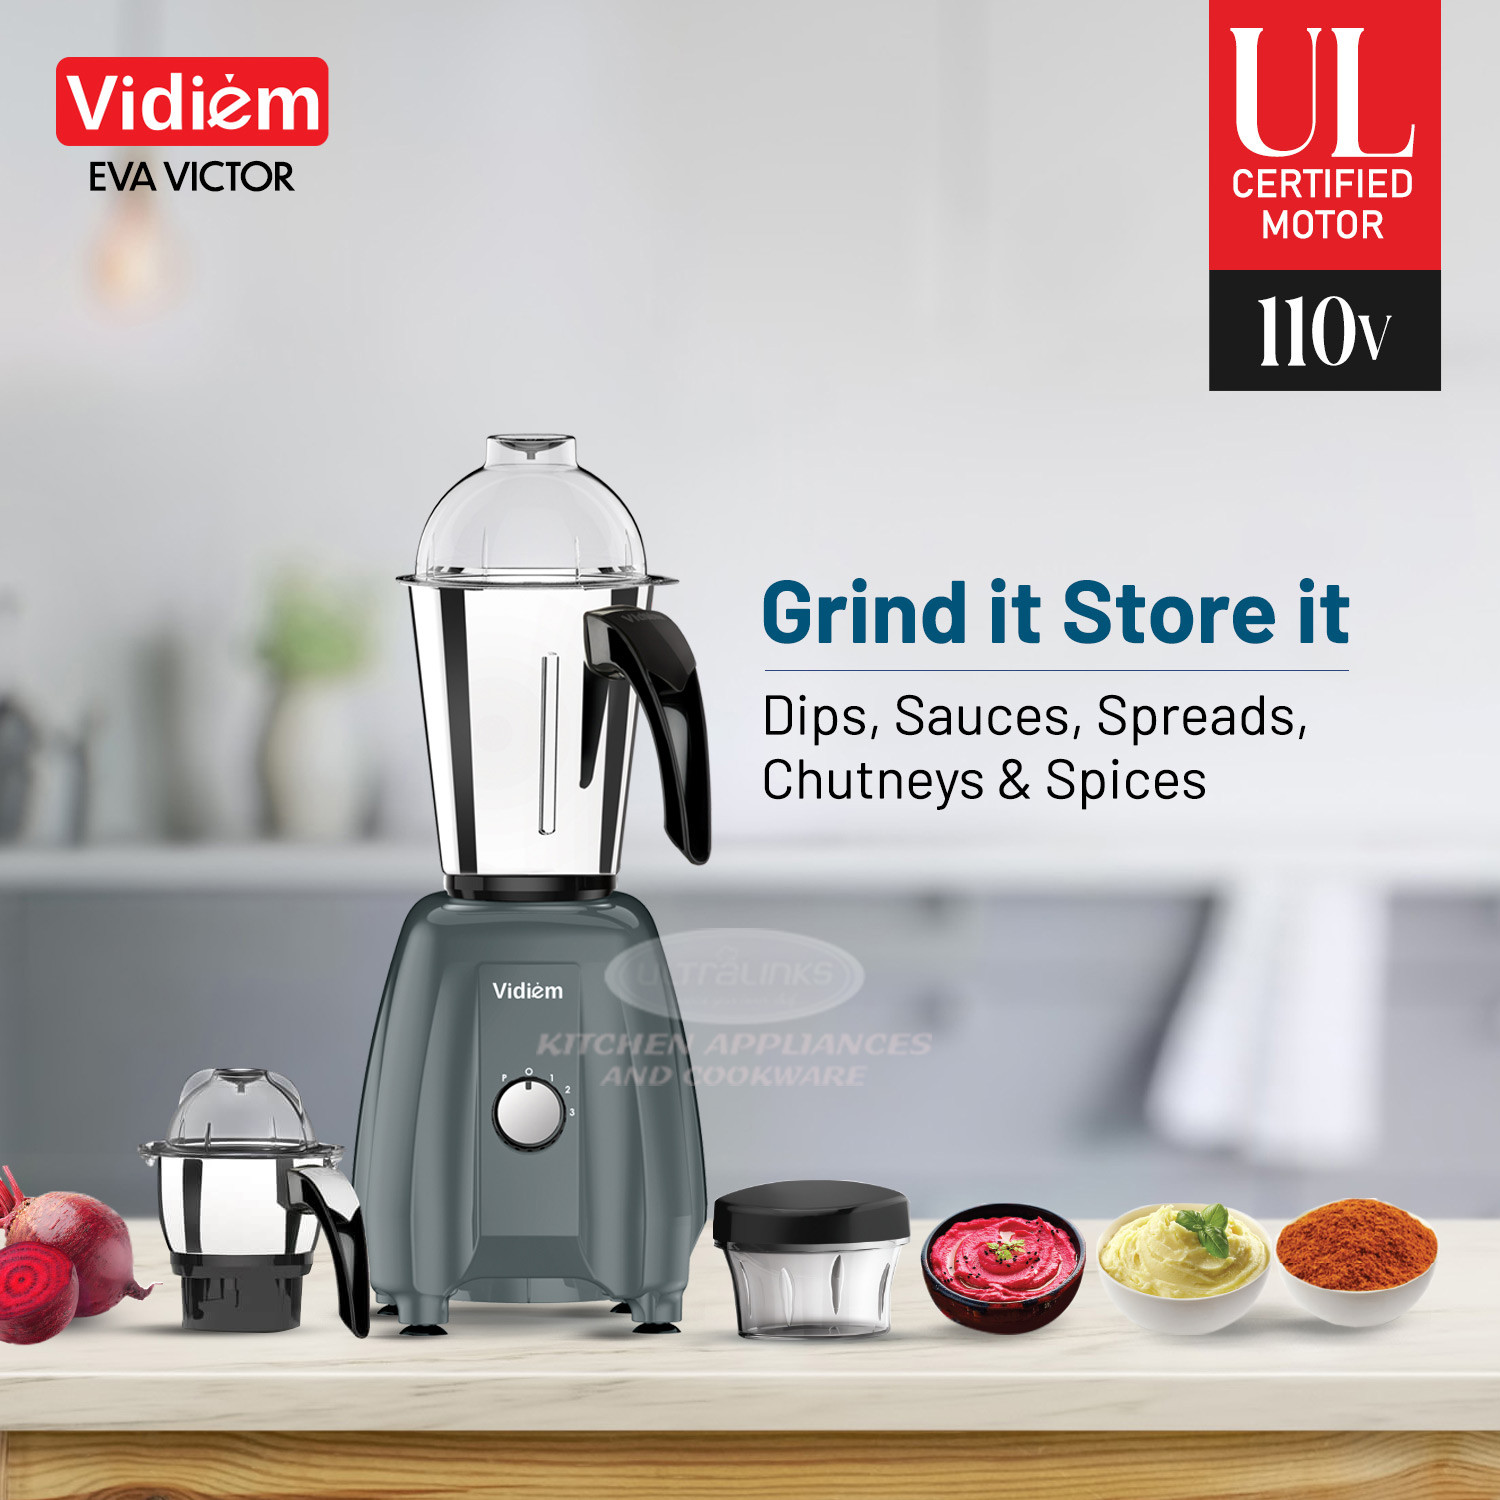 vidiem-eva-victor-pro-650w-110v-indian-mixer-grinder-ss-jars-250ml-spice-personal-coffee-herbs-grinder-with-500ml-personal-juices-shakes-smoothie-blender-made-for-canada-usa4